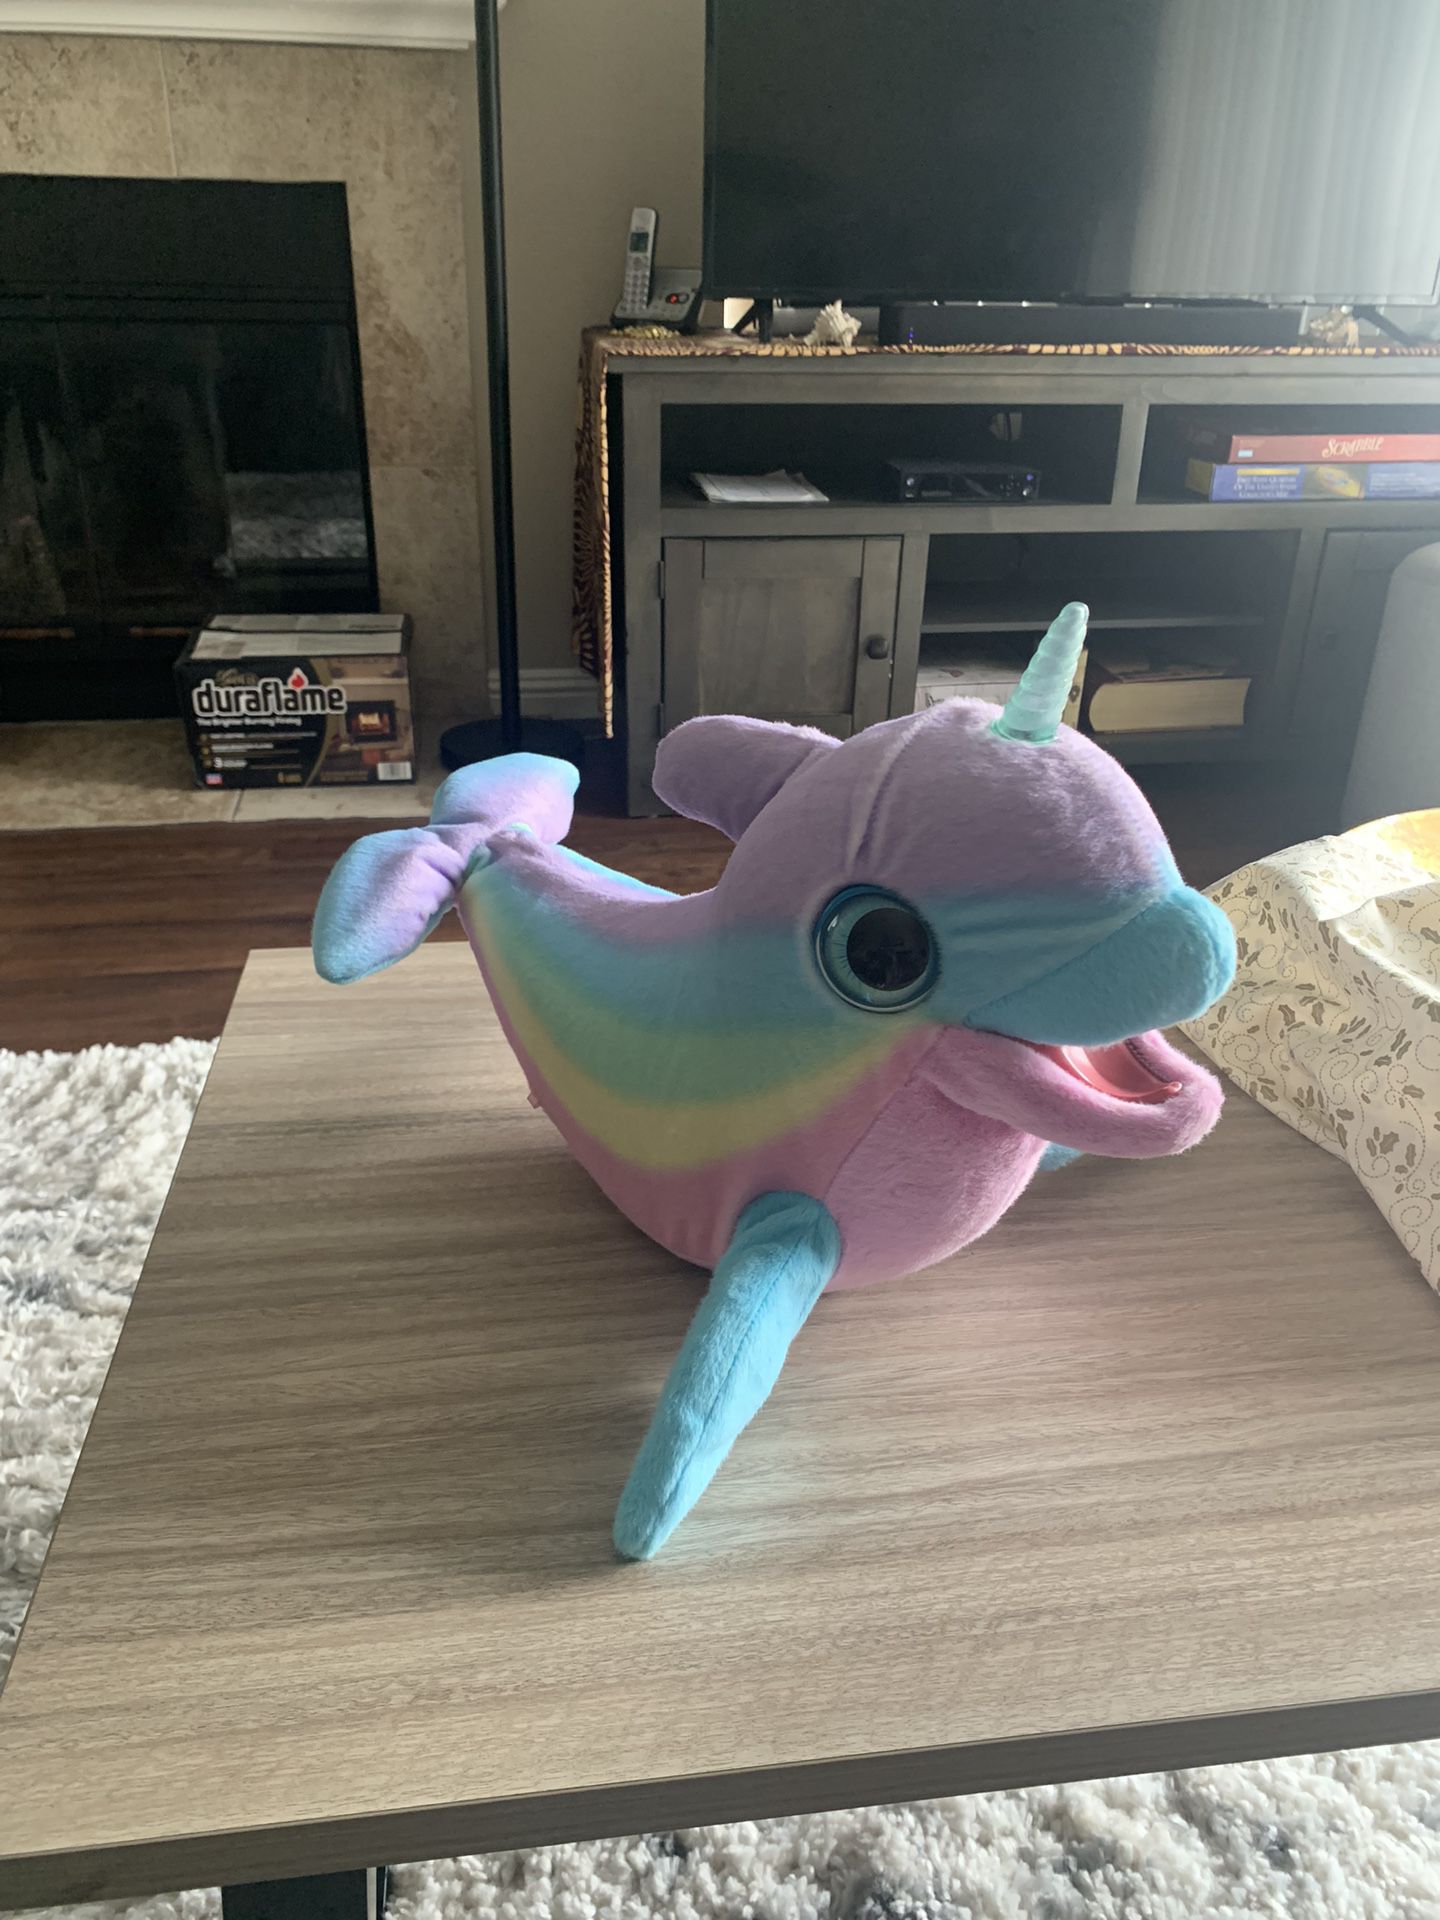 NWOT Fur Real 19” Wavy the Narwhal' Rainbow Toy Interactive Animatronic With Sound